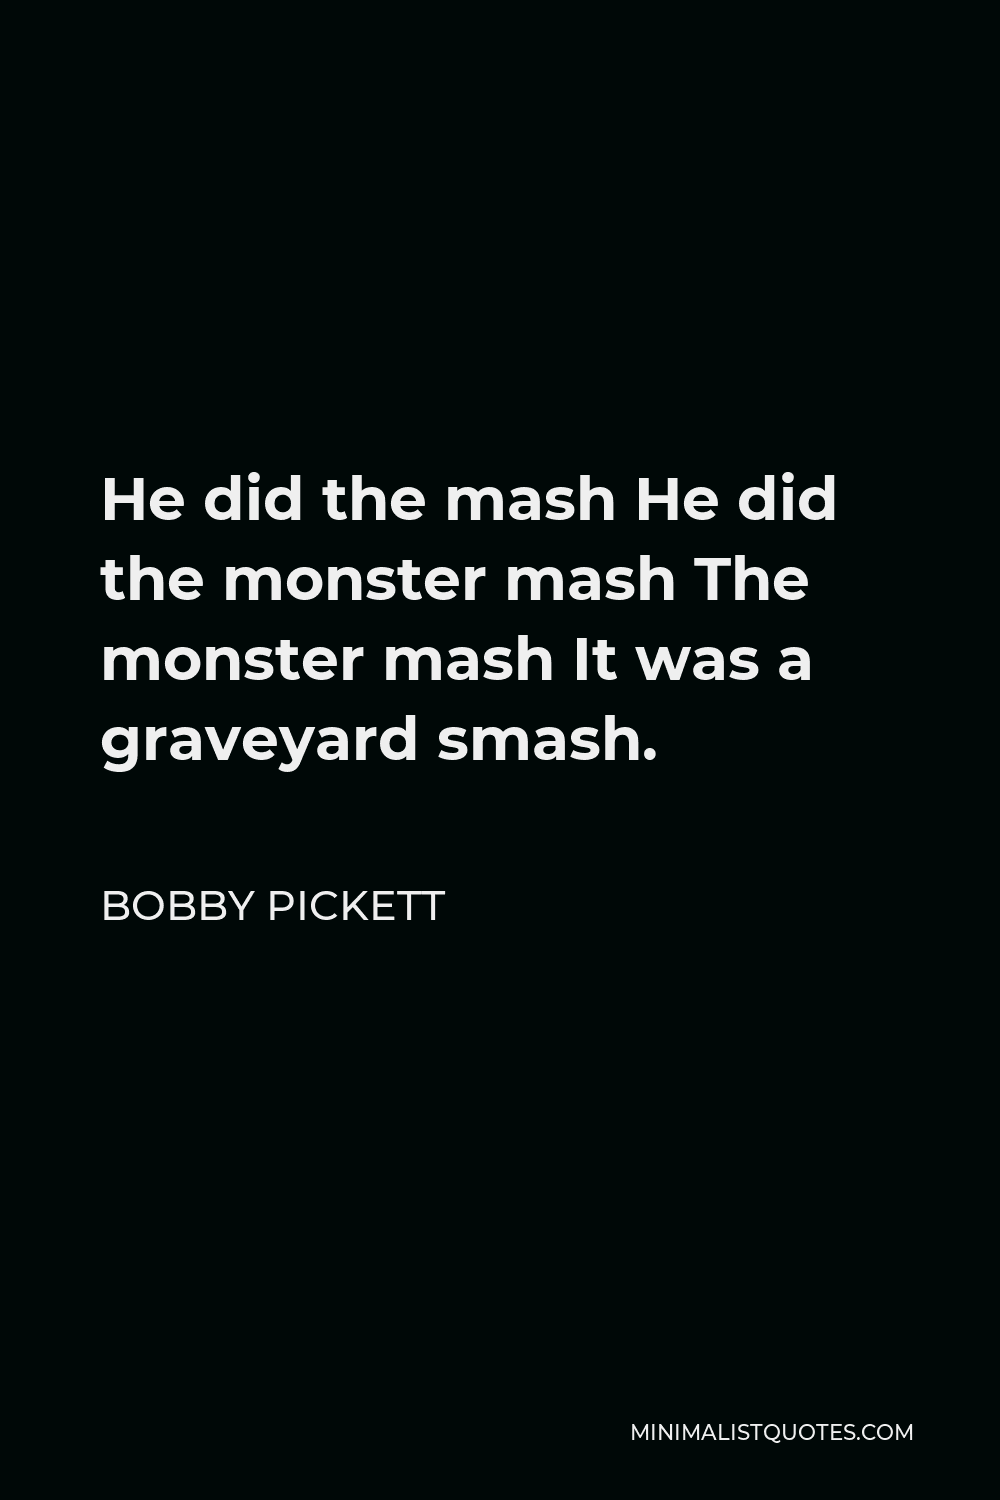 Bobby Pickett Quote - He did the mash He did the monster mash The monster mash It was a graveyard smash.